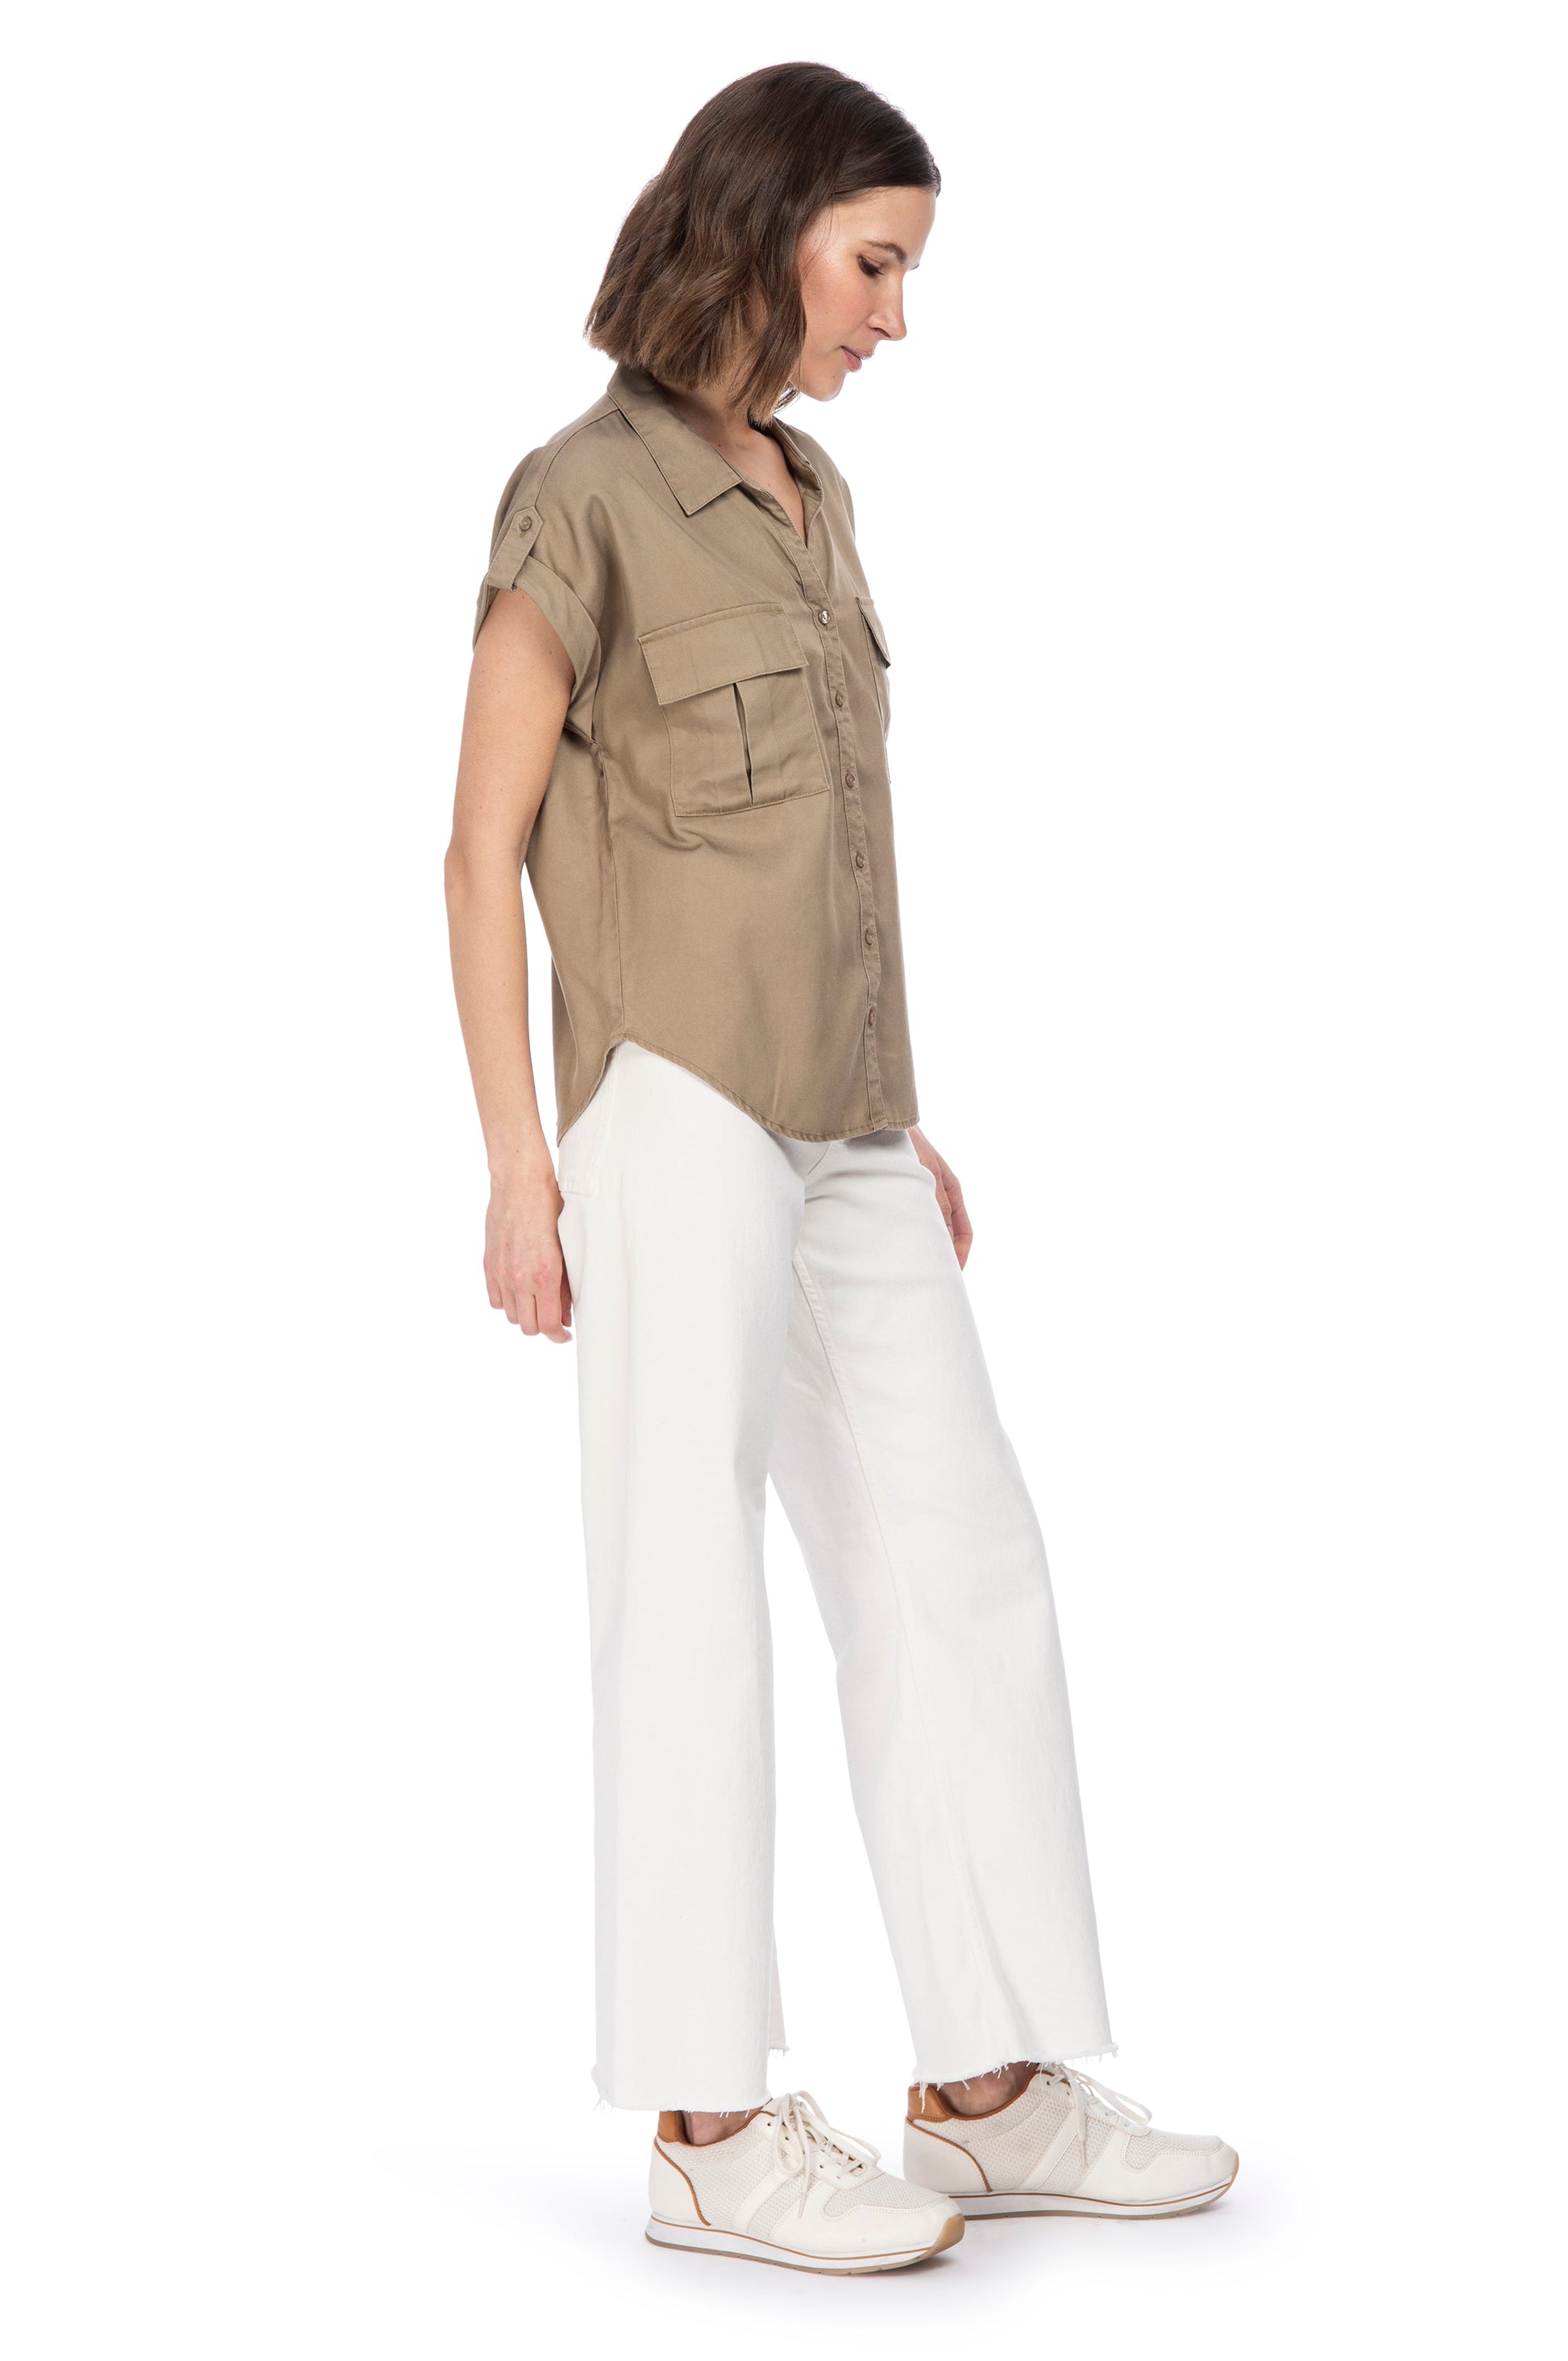 A woman in a casual chic outfit with a B Collection by Bobeau Utility Button Up top in khaki and white trousers, paired with white sneakers.